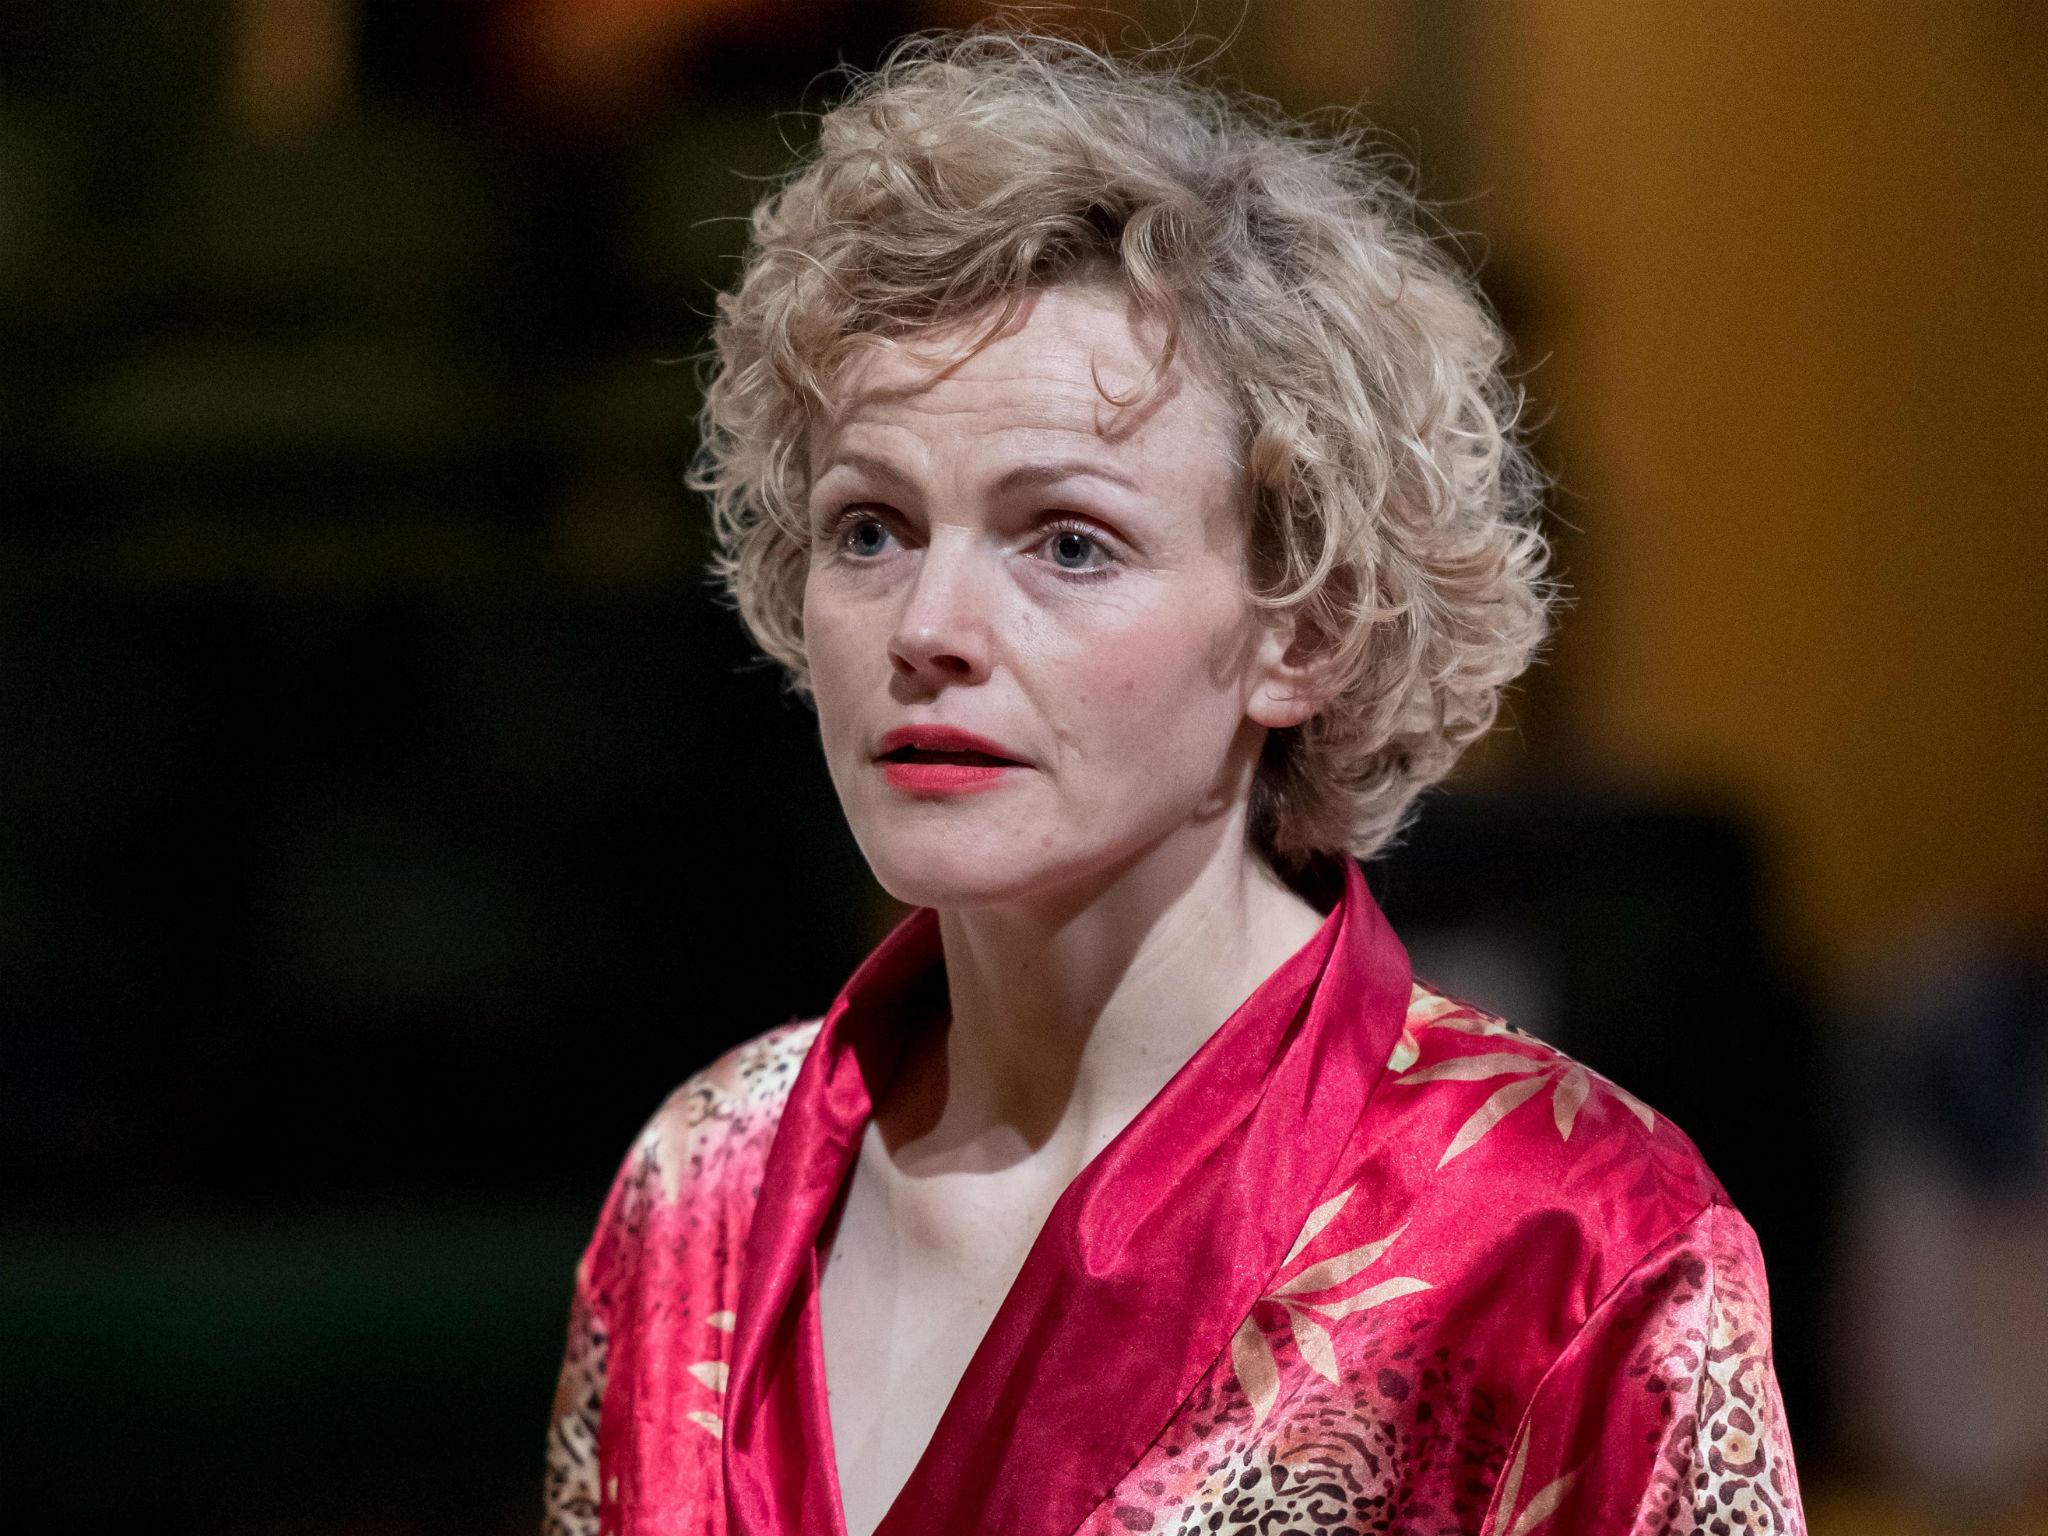 Maxine Peake plays Blanche DuBois in A Streetcar Named Desire at Manchester Royal Exchange